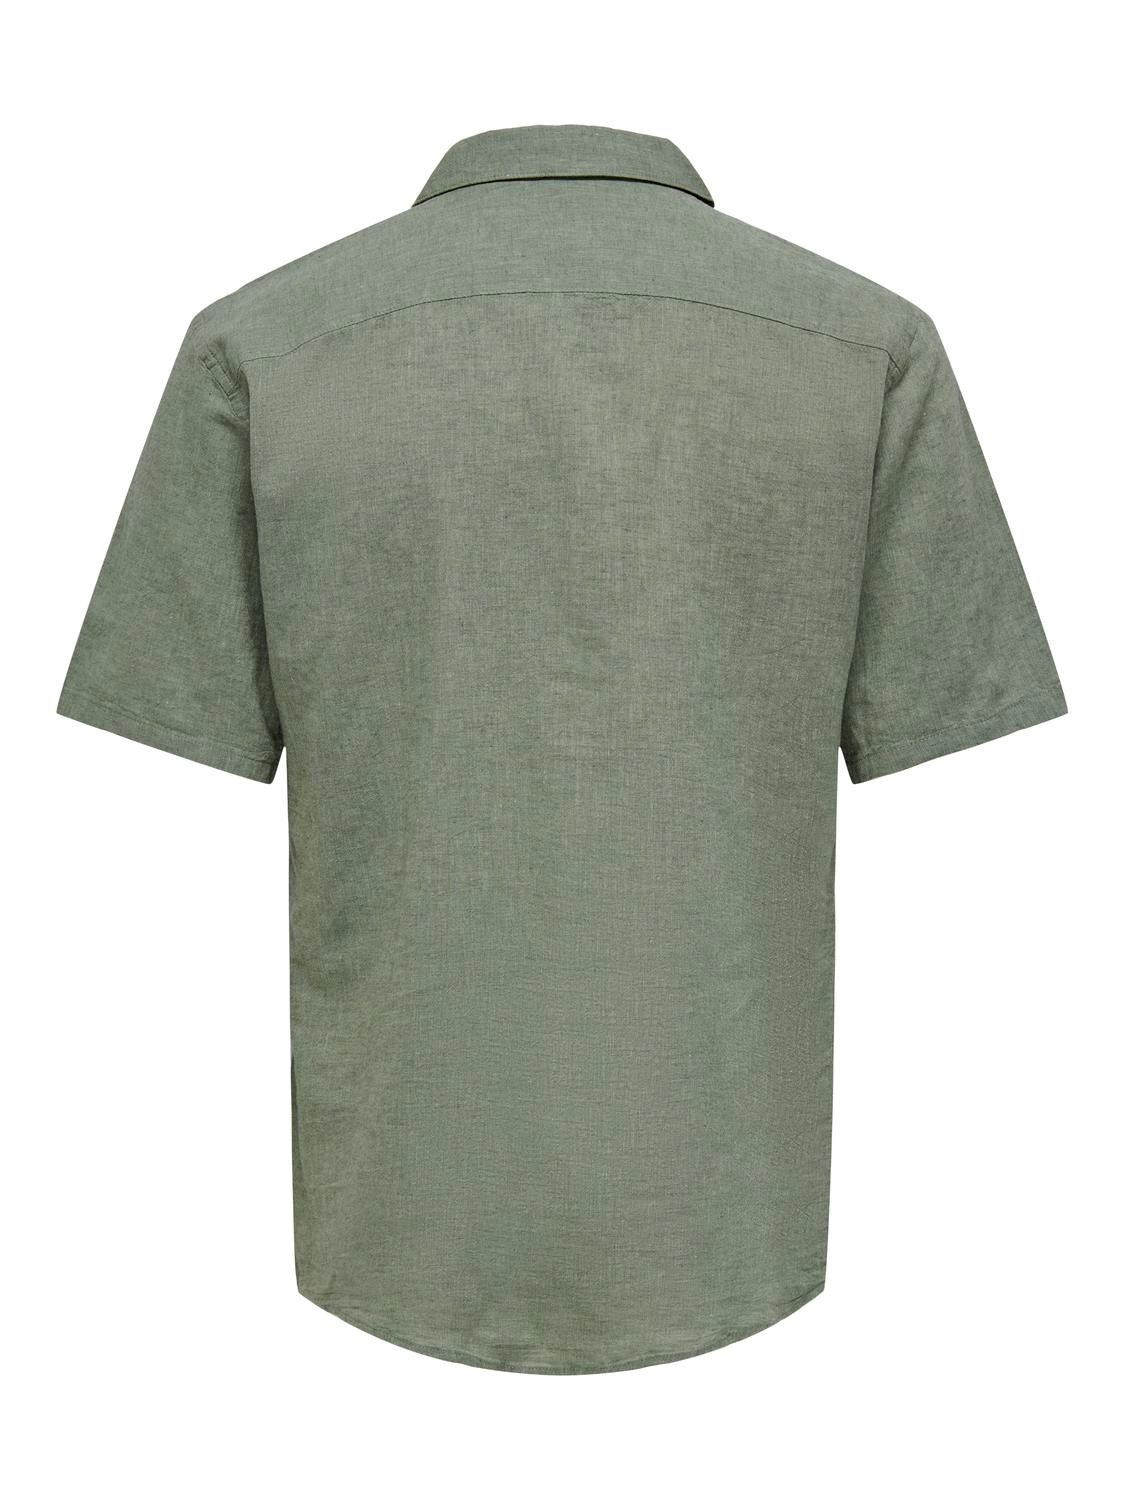 ONLY & SONS Shirt with short sleeves -Swamp - 22025116